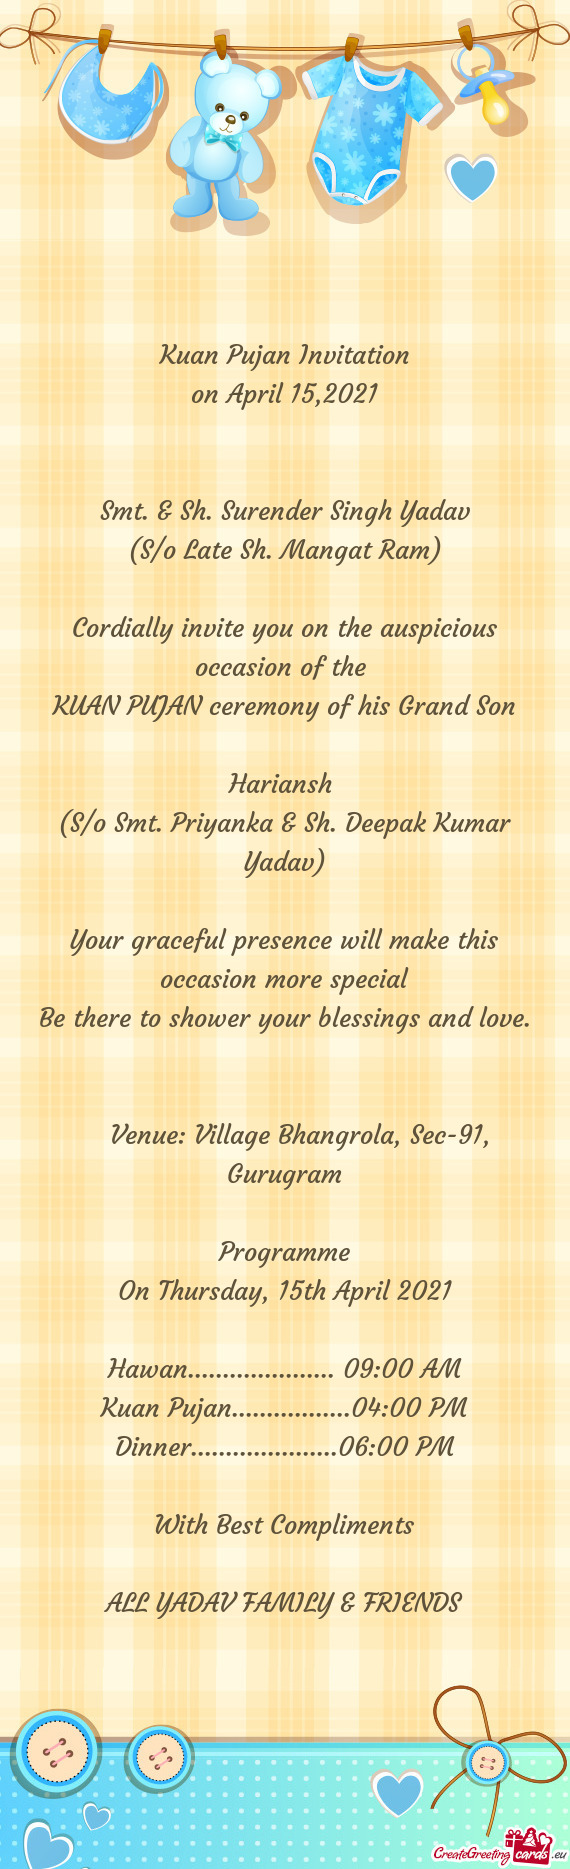 Mangat Ram)
 
 Cordially invite you on the auspicious occasion of the 
 KUAN PUJAN ceremony of his